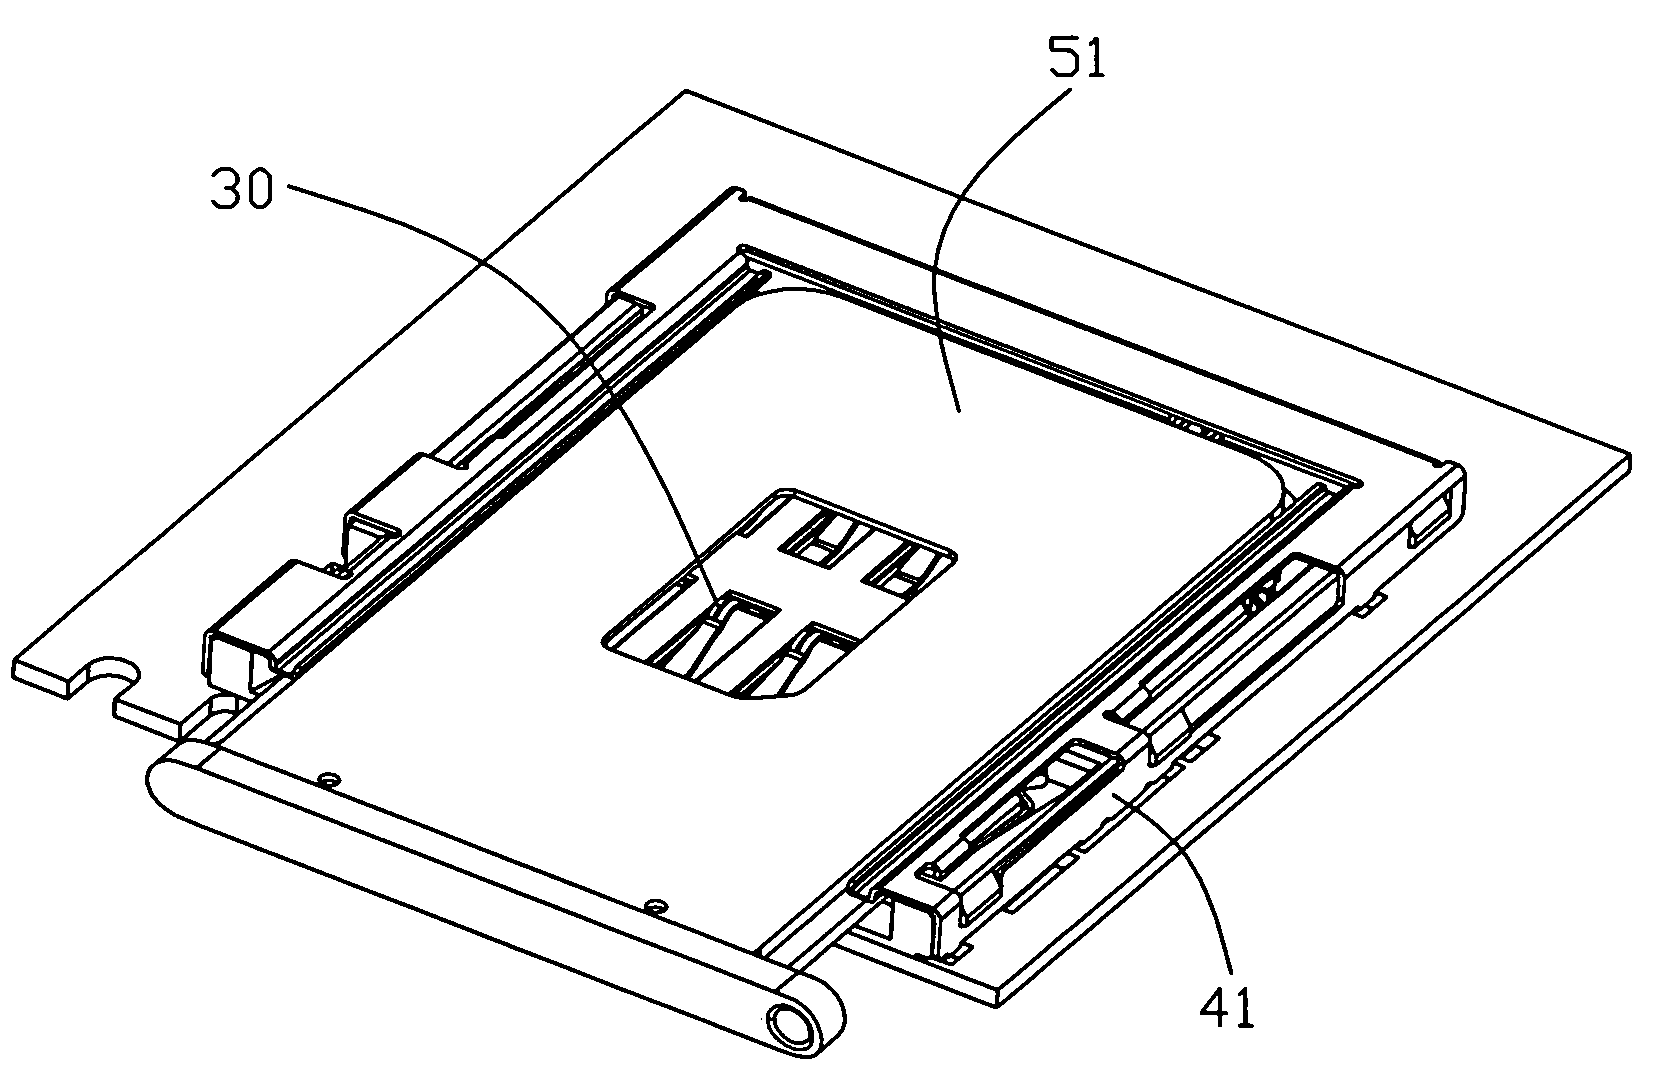 Electrical card connector with at least a card locking mechanism